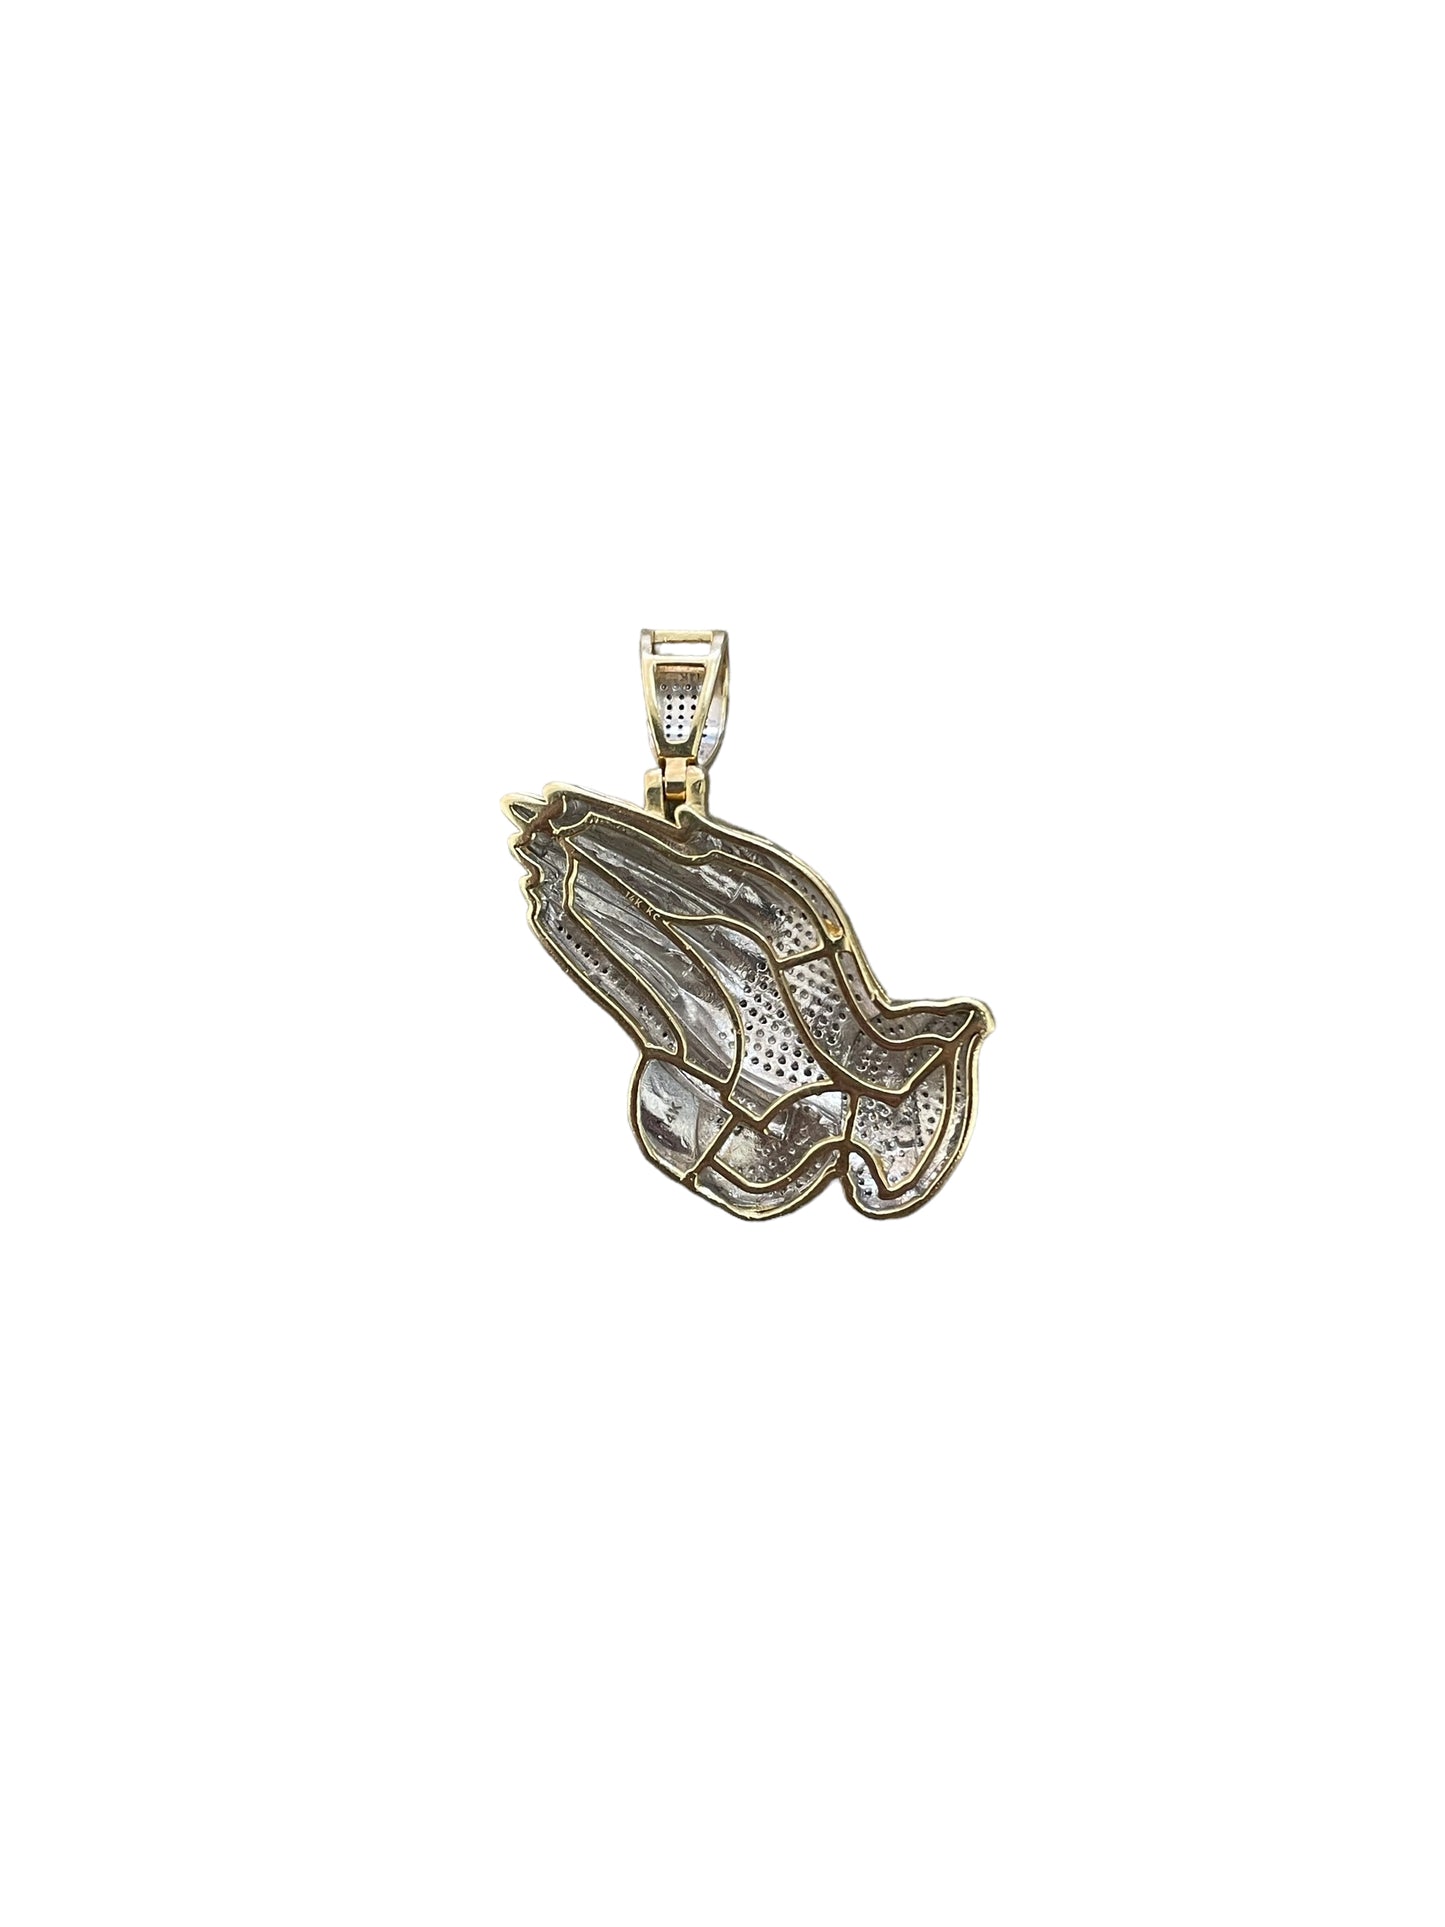 14K Two-Tone Gold Diamond Prayer Hands Charm (10.1 Grams) (Local Pick-Up Only)